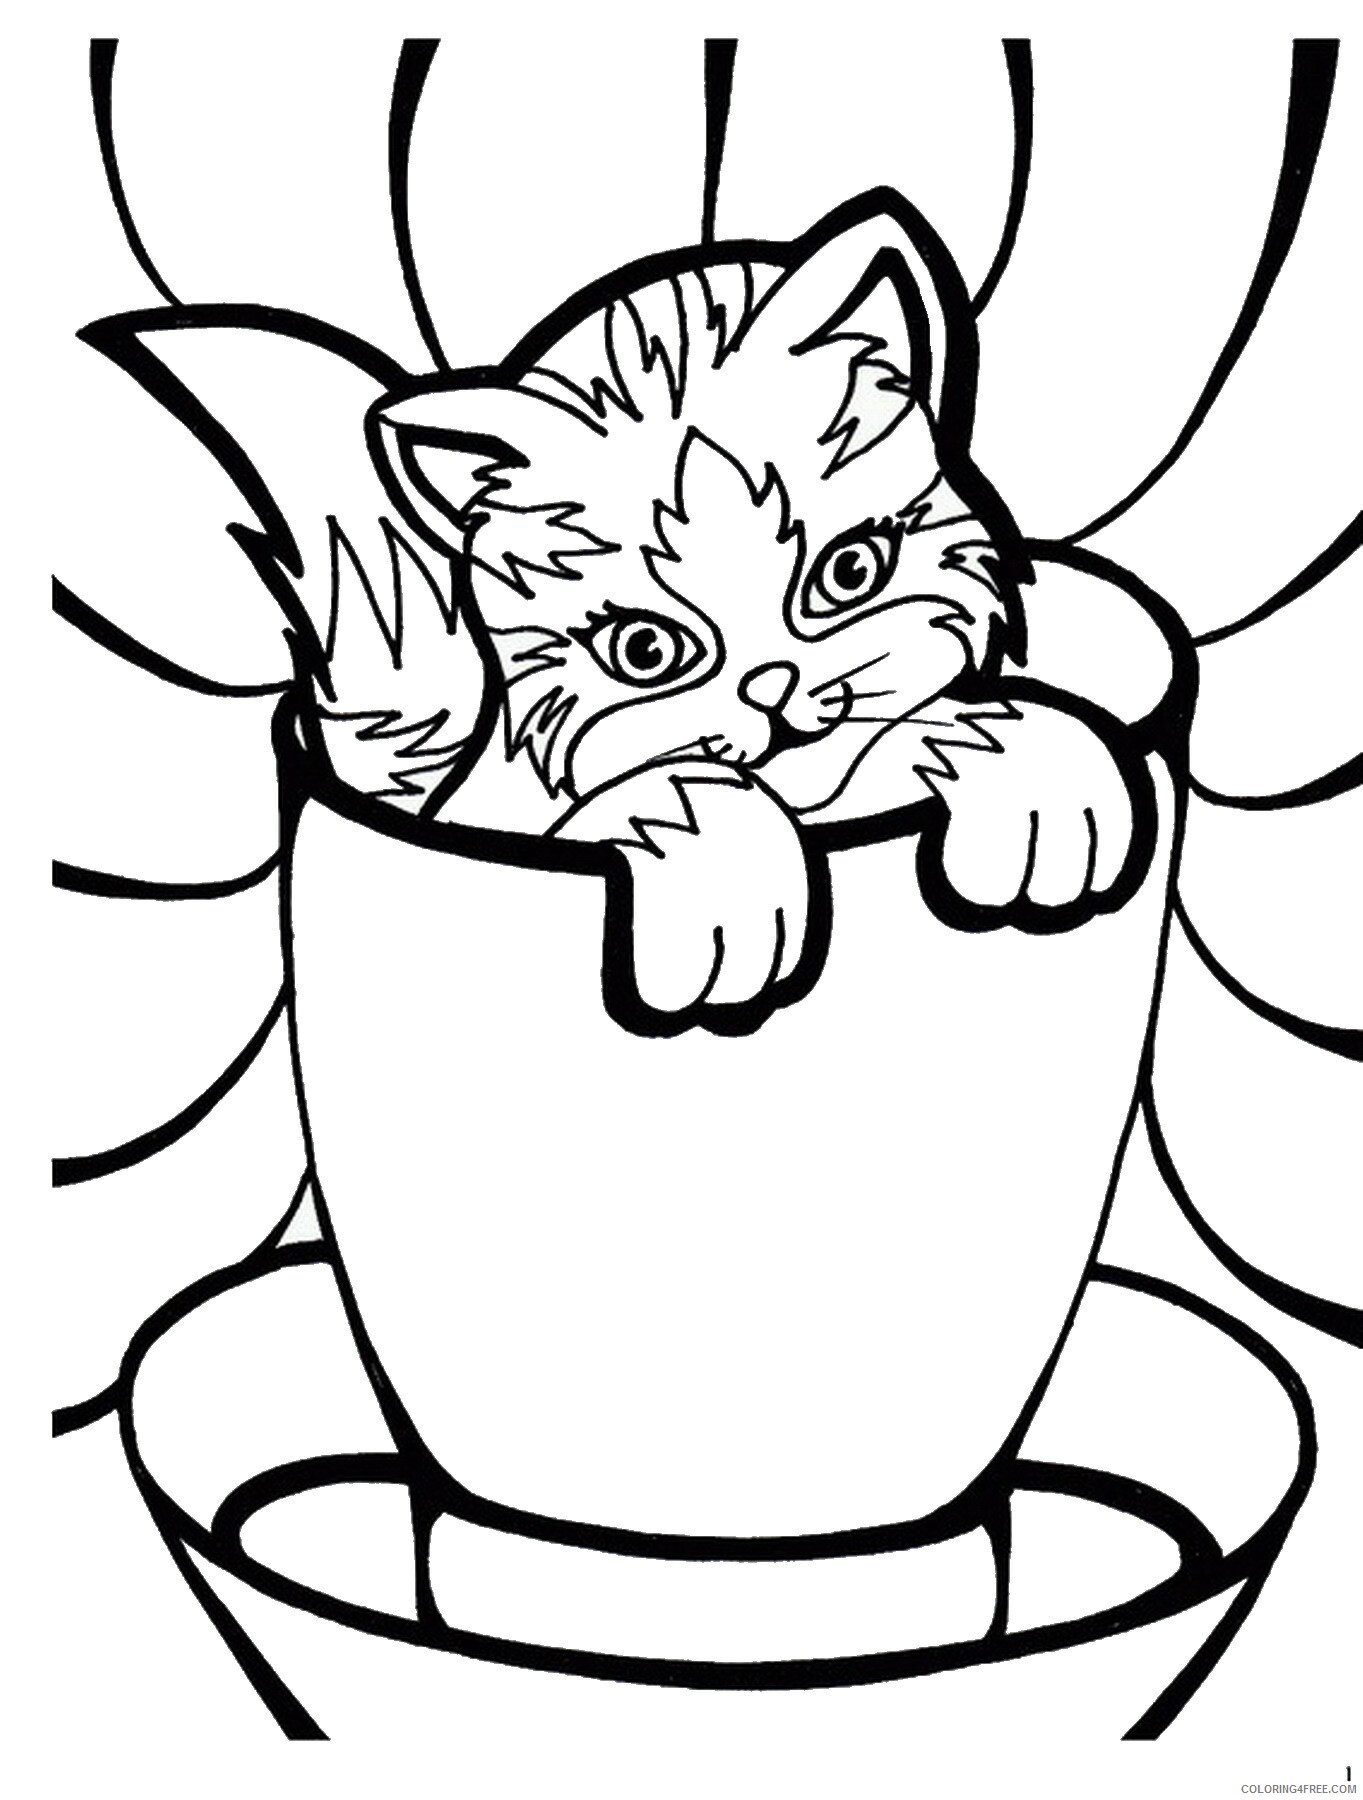 Cat Coloring Pages Animal Printable Sheets cats_32 2021 0826 Coloring4free